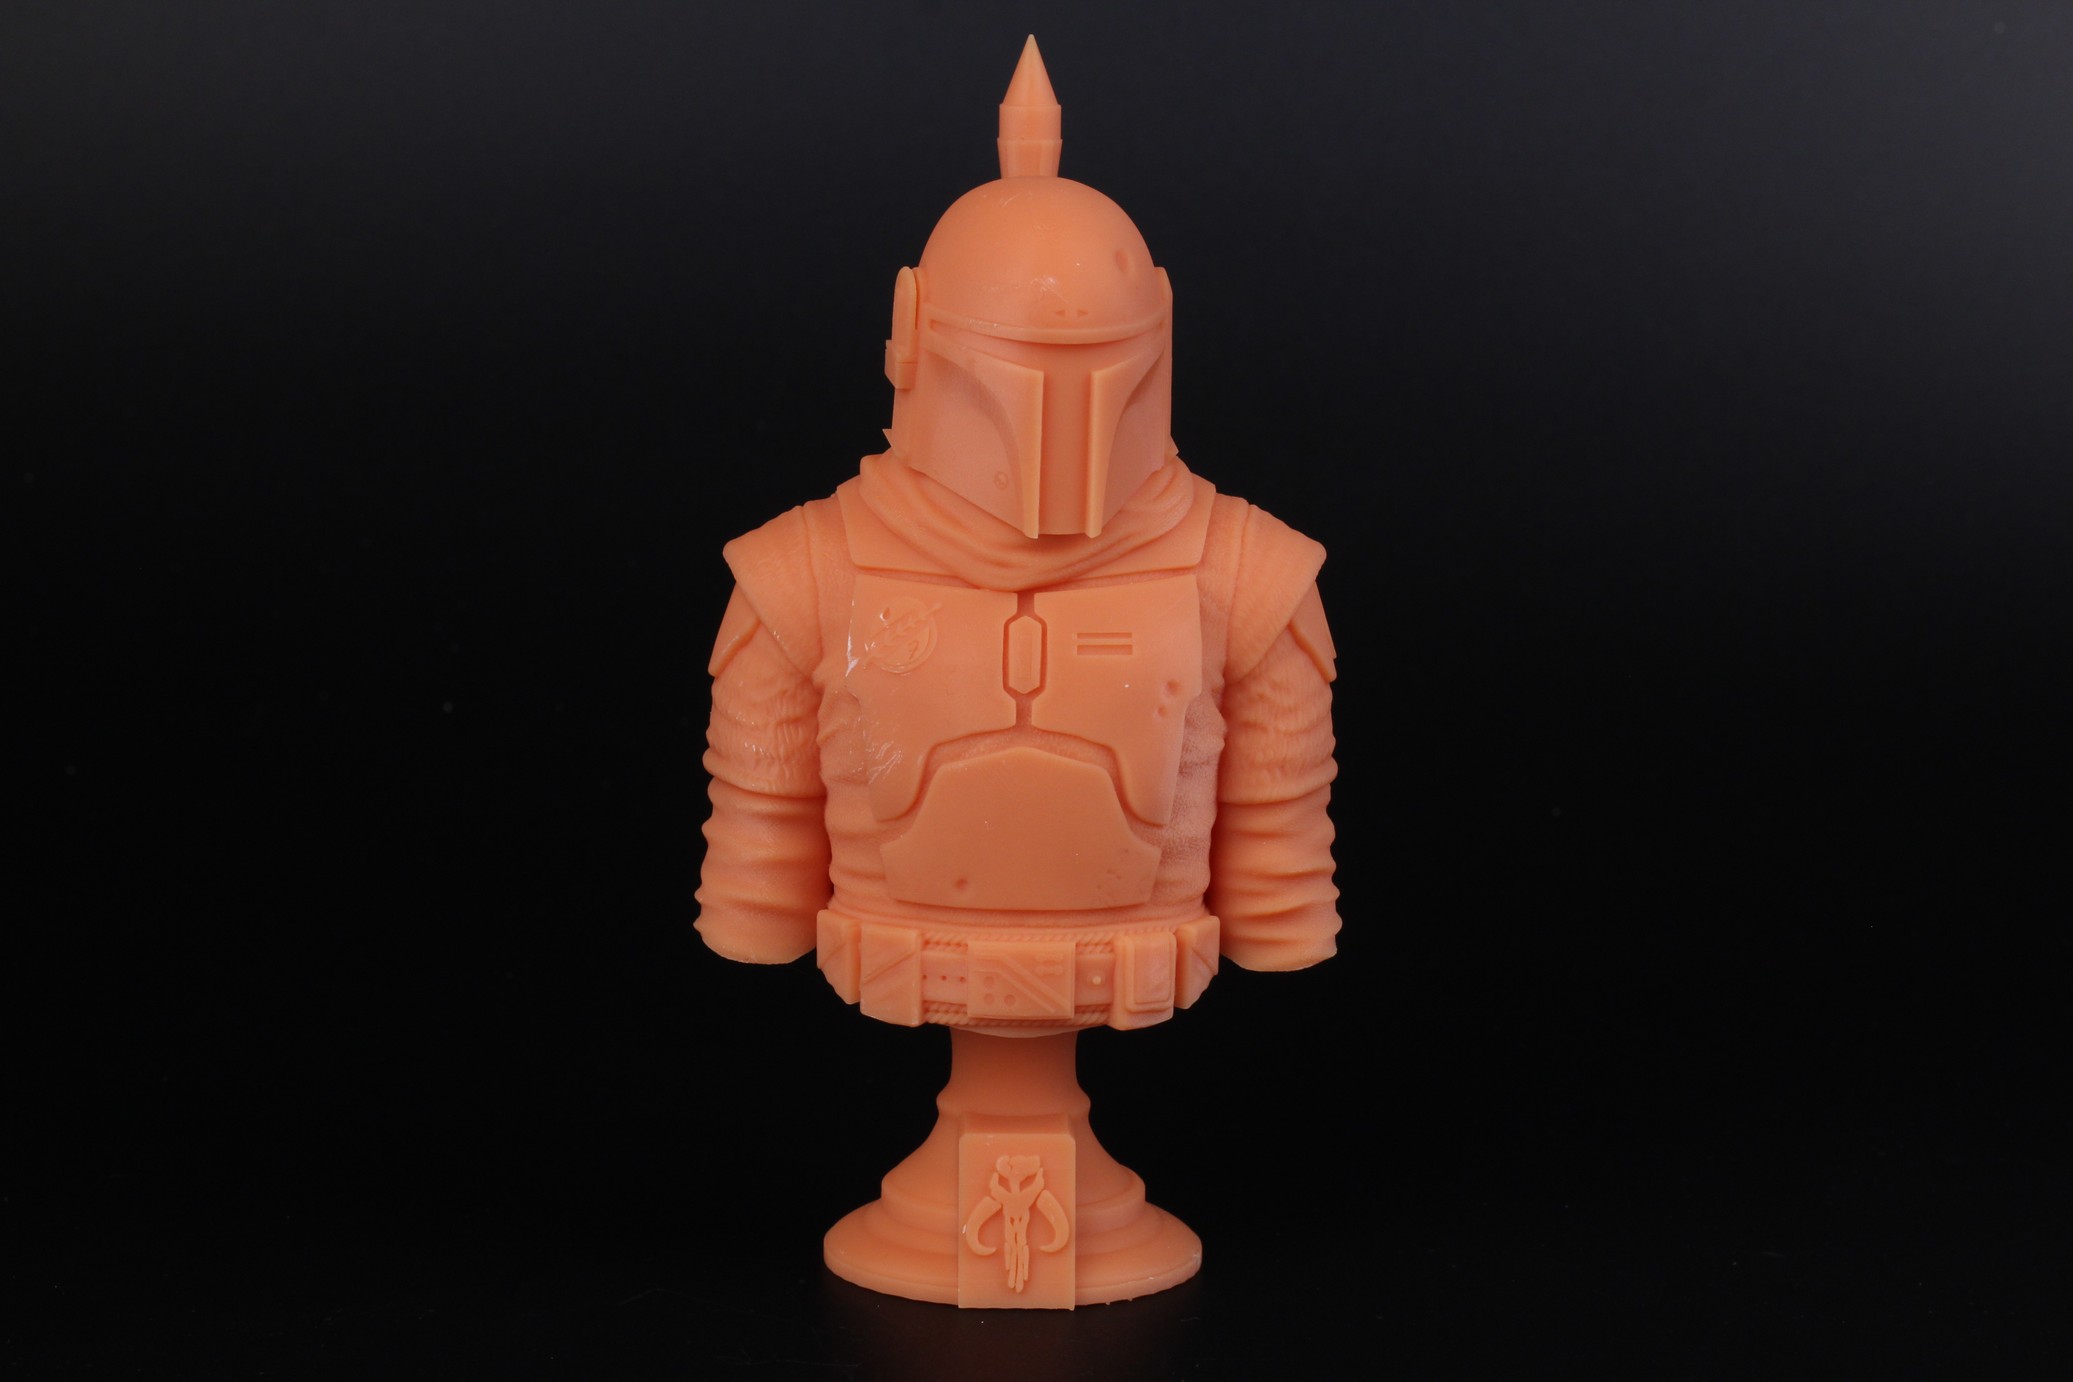 Boba Fett Bust printed on Anycubic Photon M3 Max 4 | Anycubic Photon M3 Max Review: Who Needs FDM Anymore?